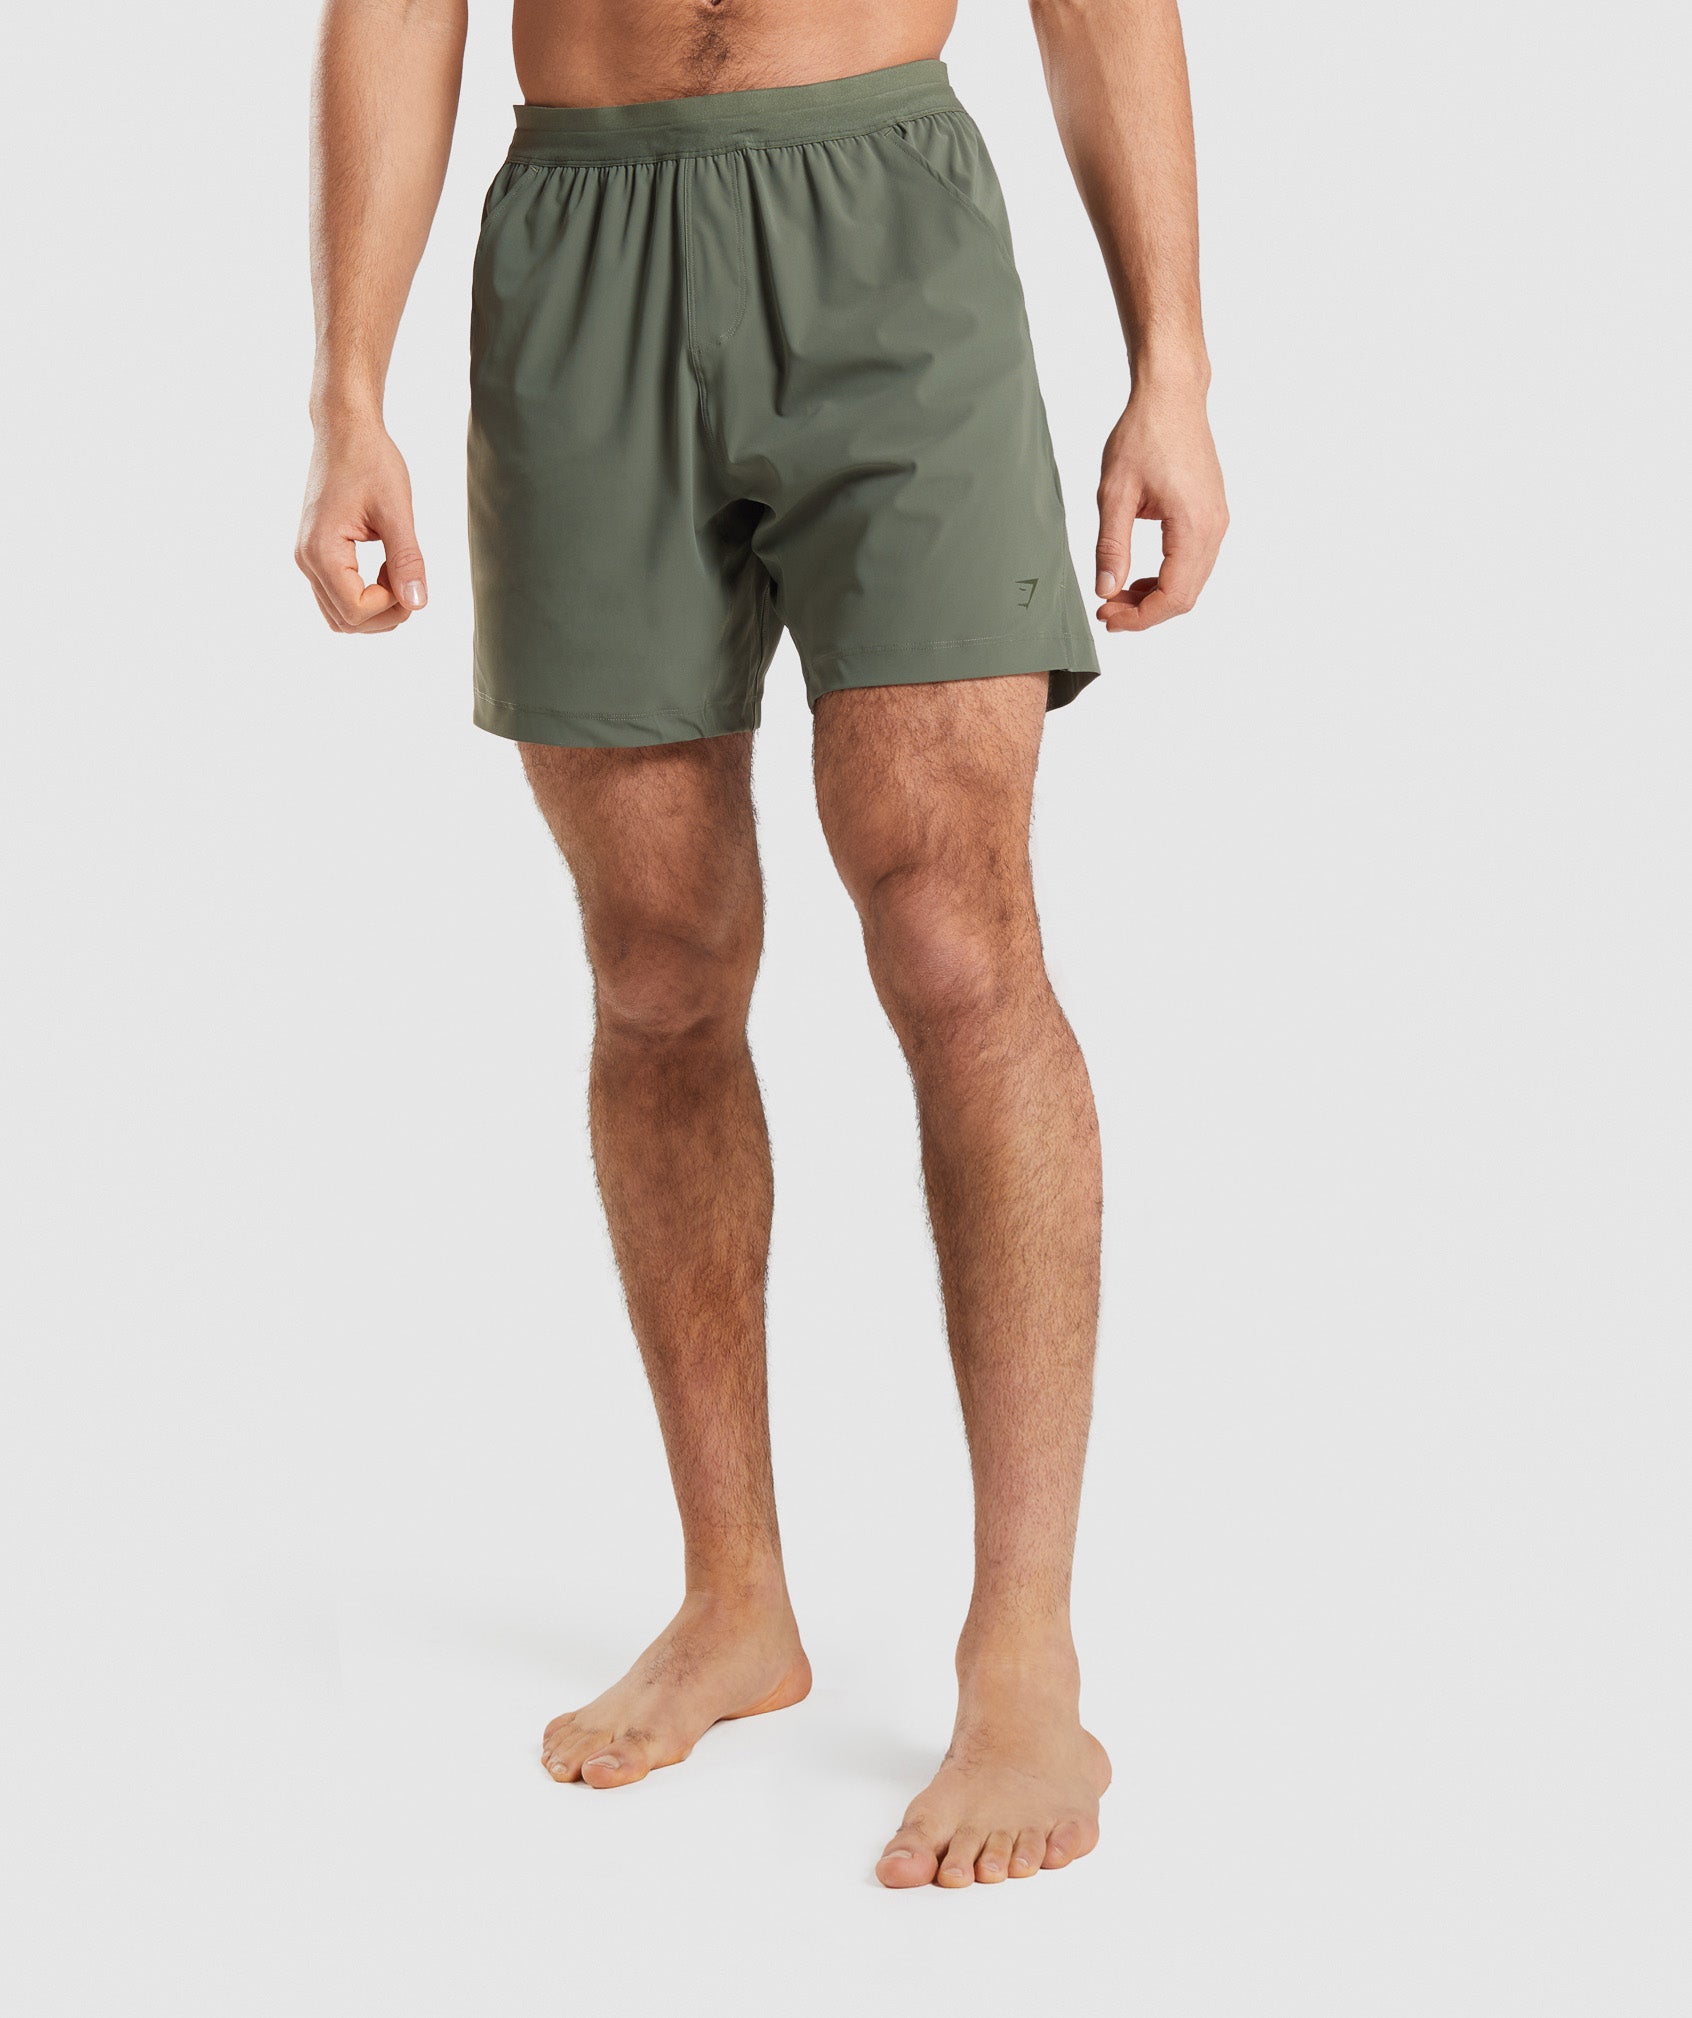 Studio Shorts in Core Olive - view 1